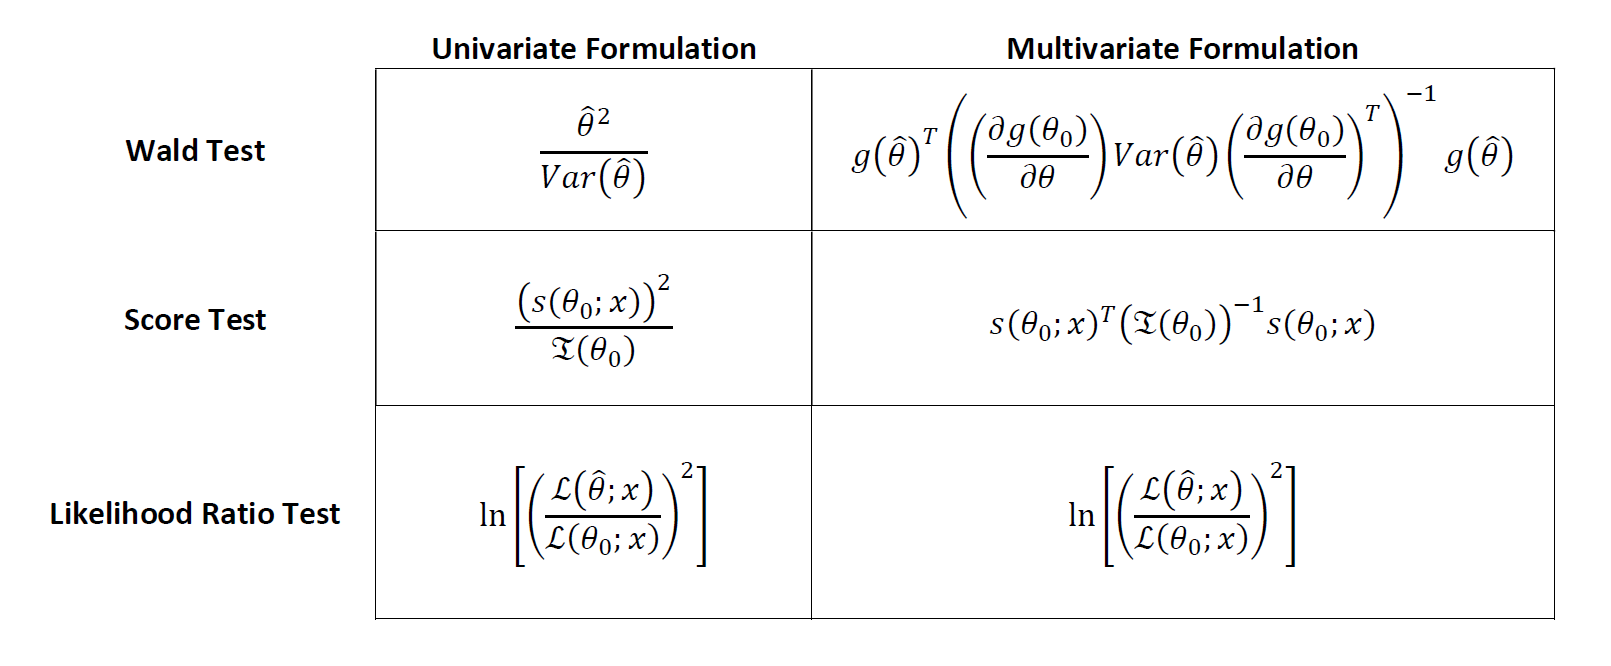 Mathematical Statistics — Rigorous Derivations and Analysis of the Wald  Test, Score Test, and Likelihood Ratio Test | by Andrew Rothman | Towards  Data Science